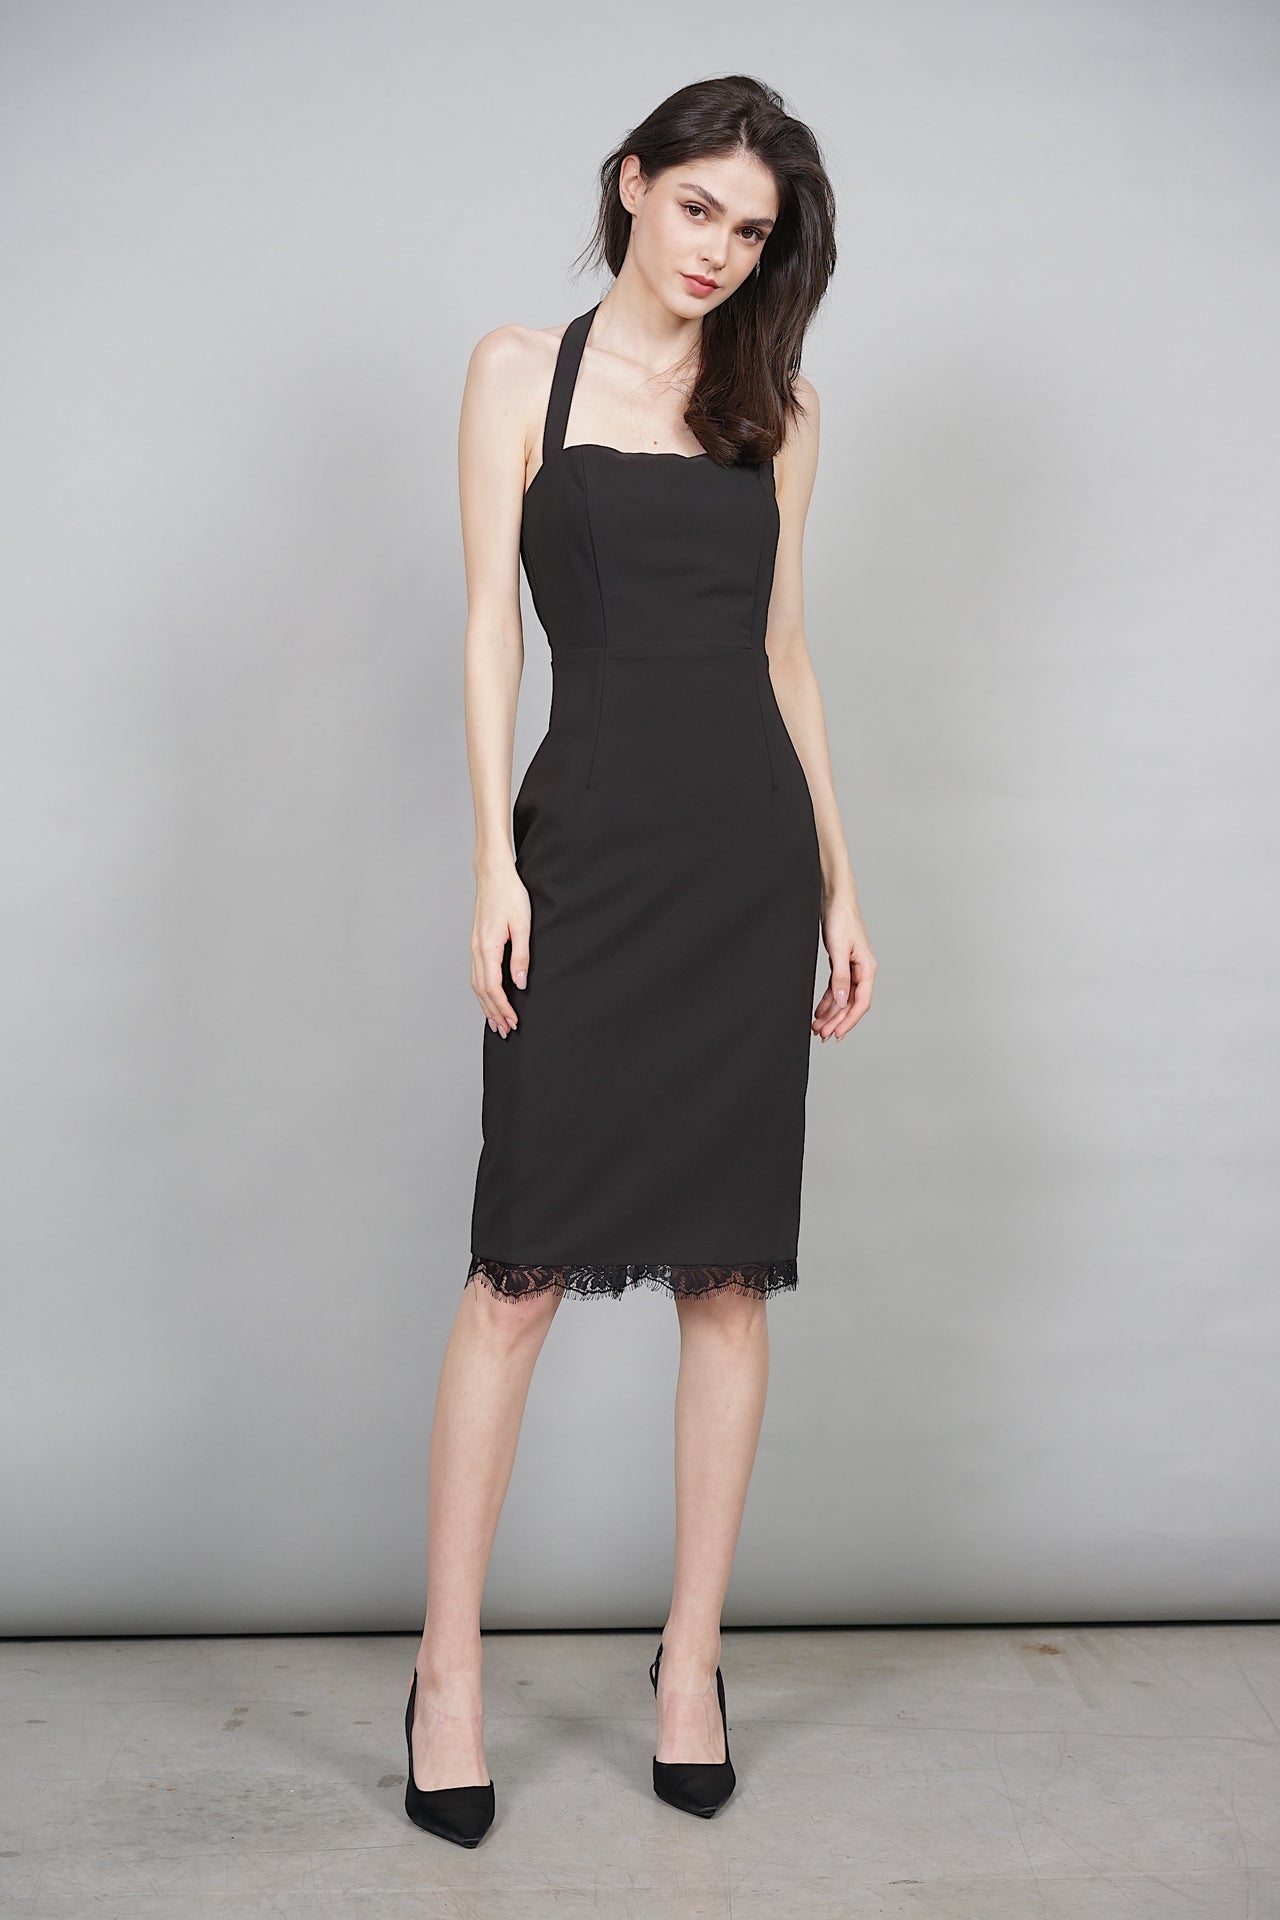 Ronda Lace-Trimmed Dress in Black - Arriving Soon